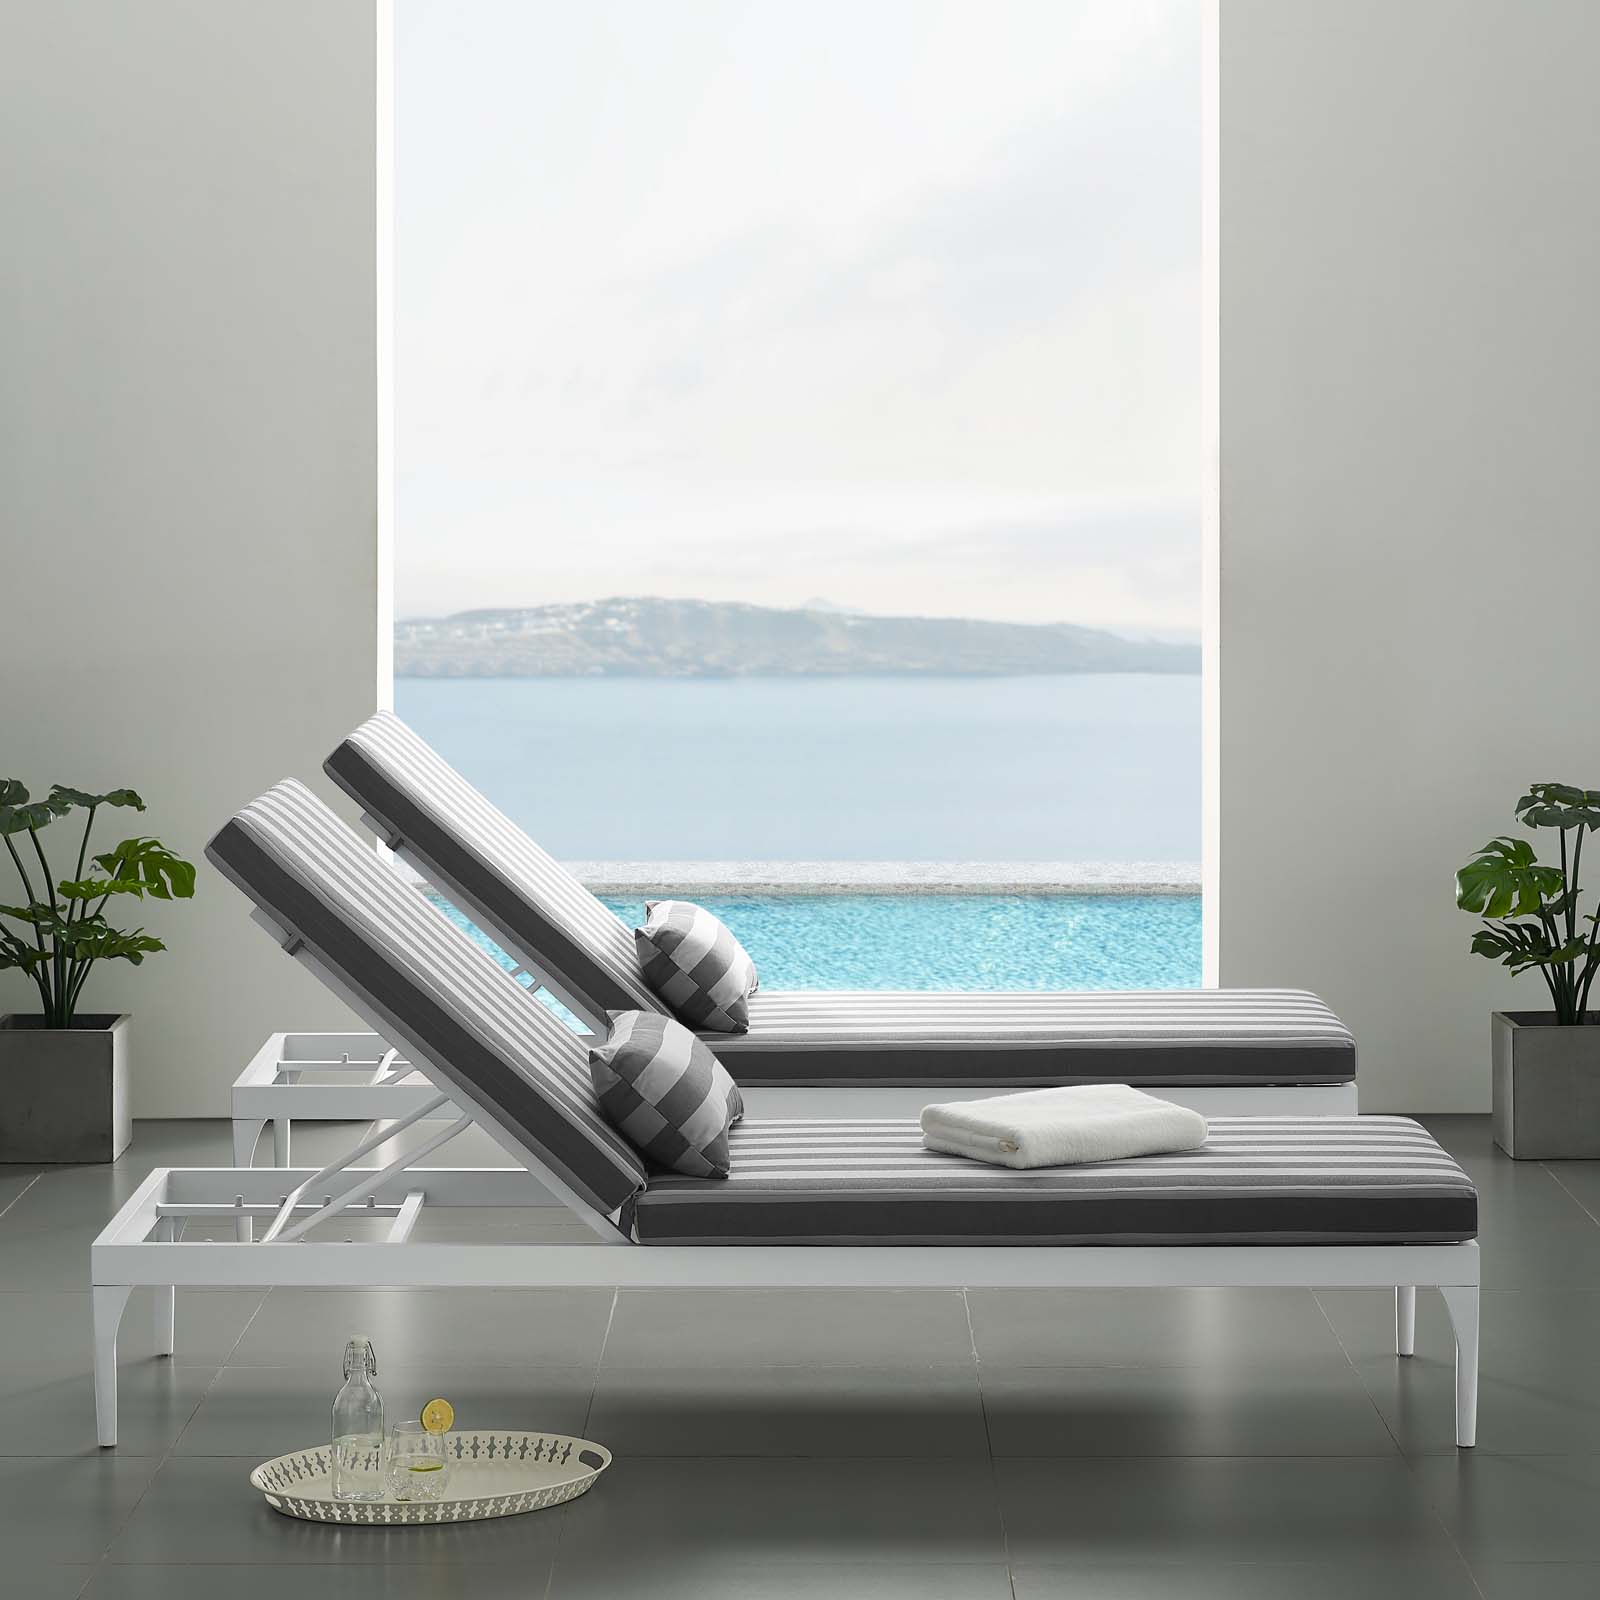 Modern Contemporary Urban Design Outdoor Patio Balcony Garden Furniture Lounge Chair Chaise, Fabric Metal Steel, White Grey Gray - image 4 of 7